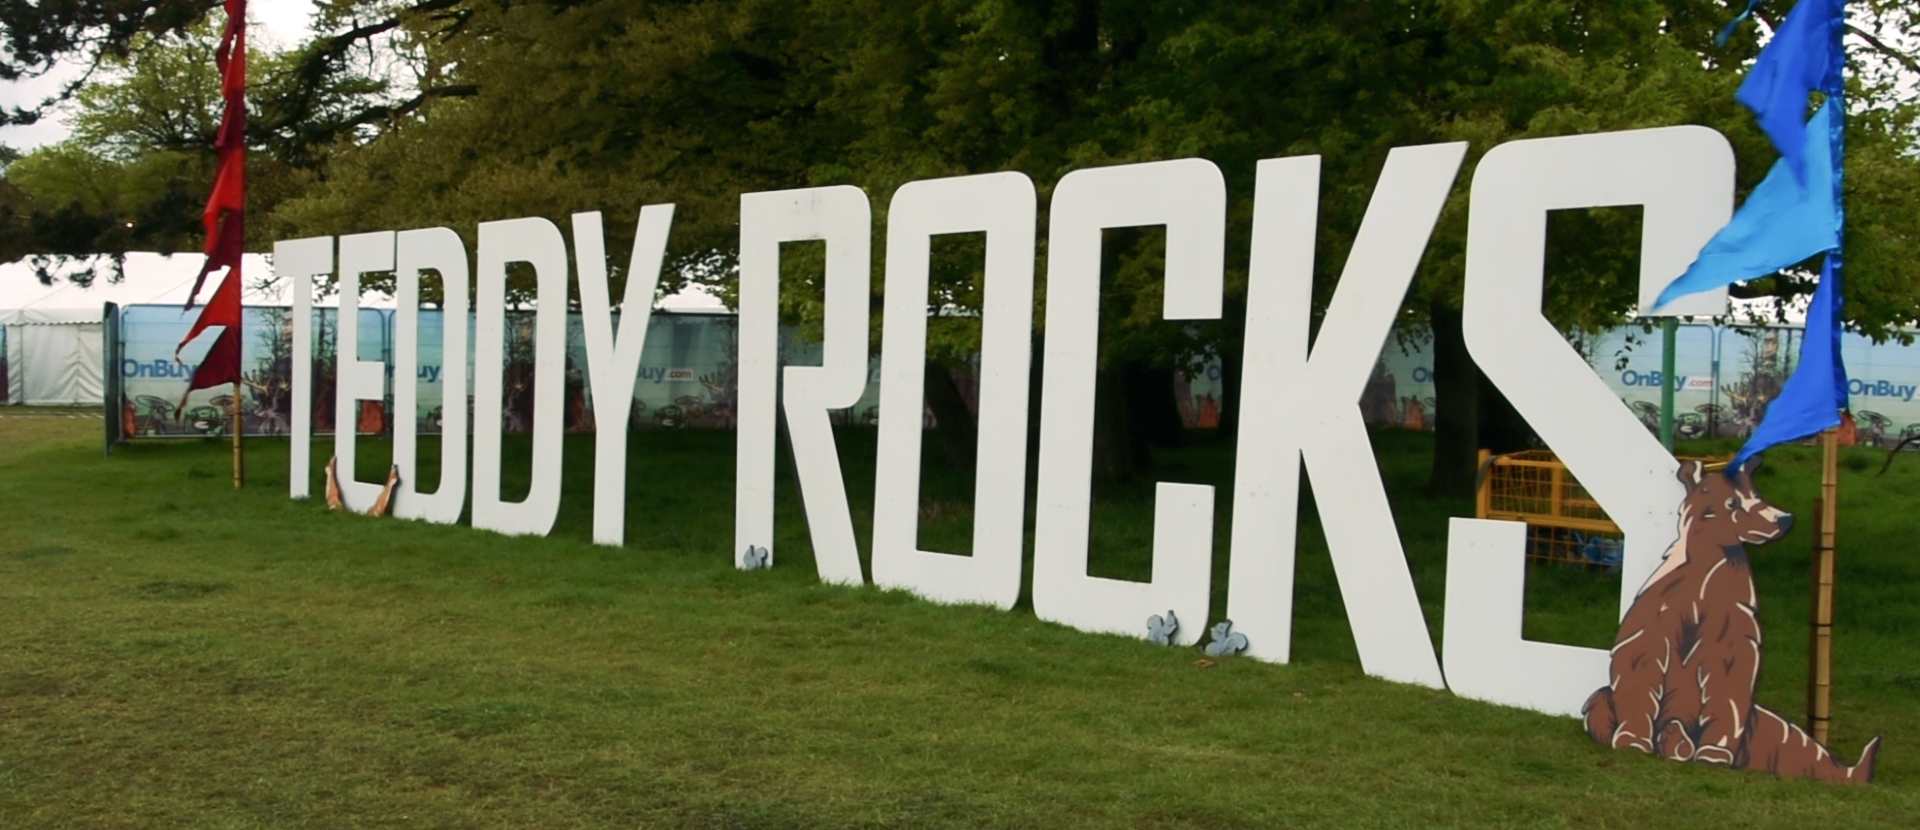 Picture of Teddy Rocks festival signage